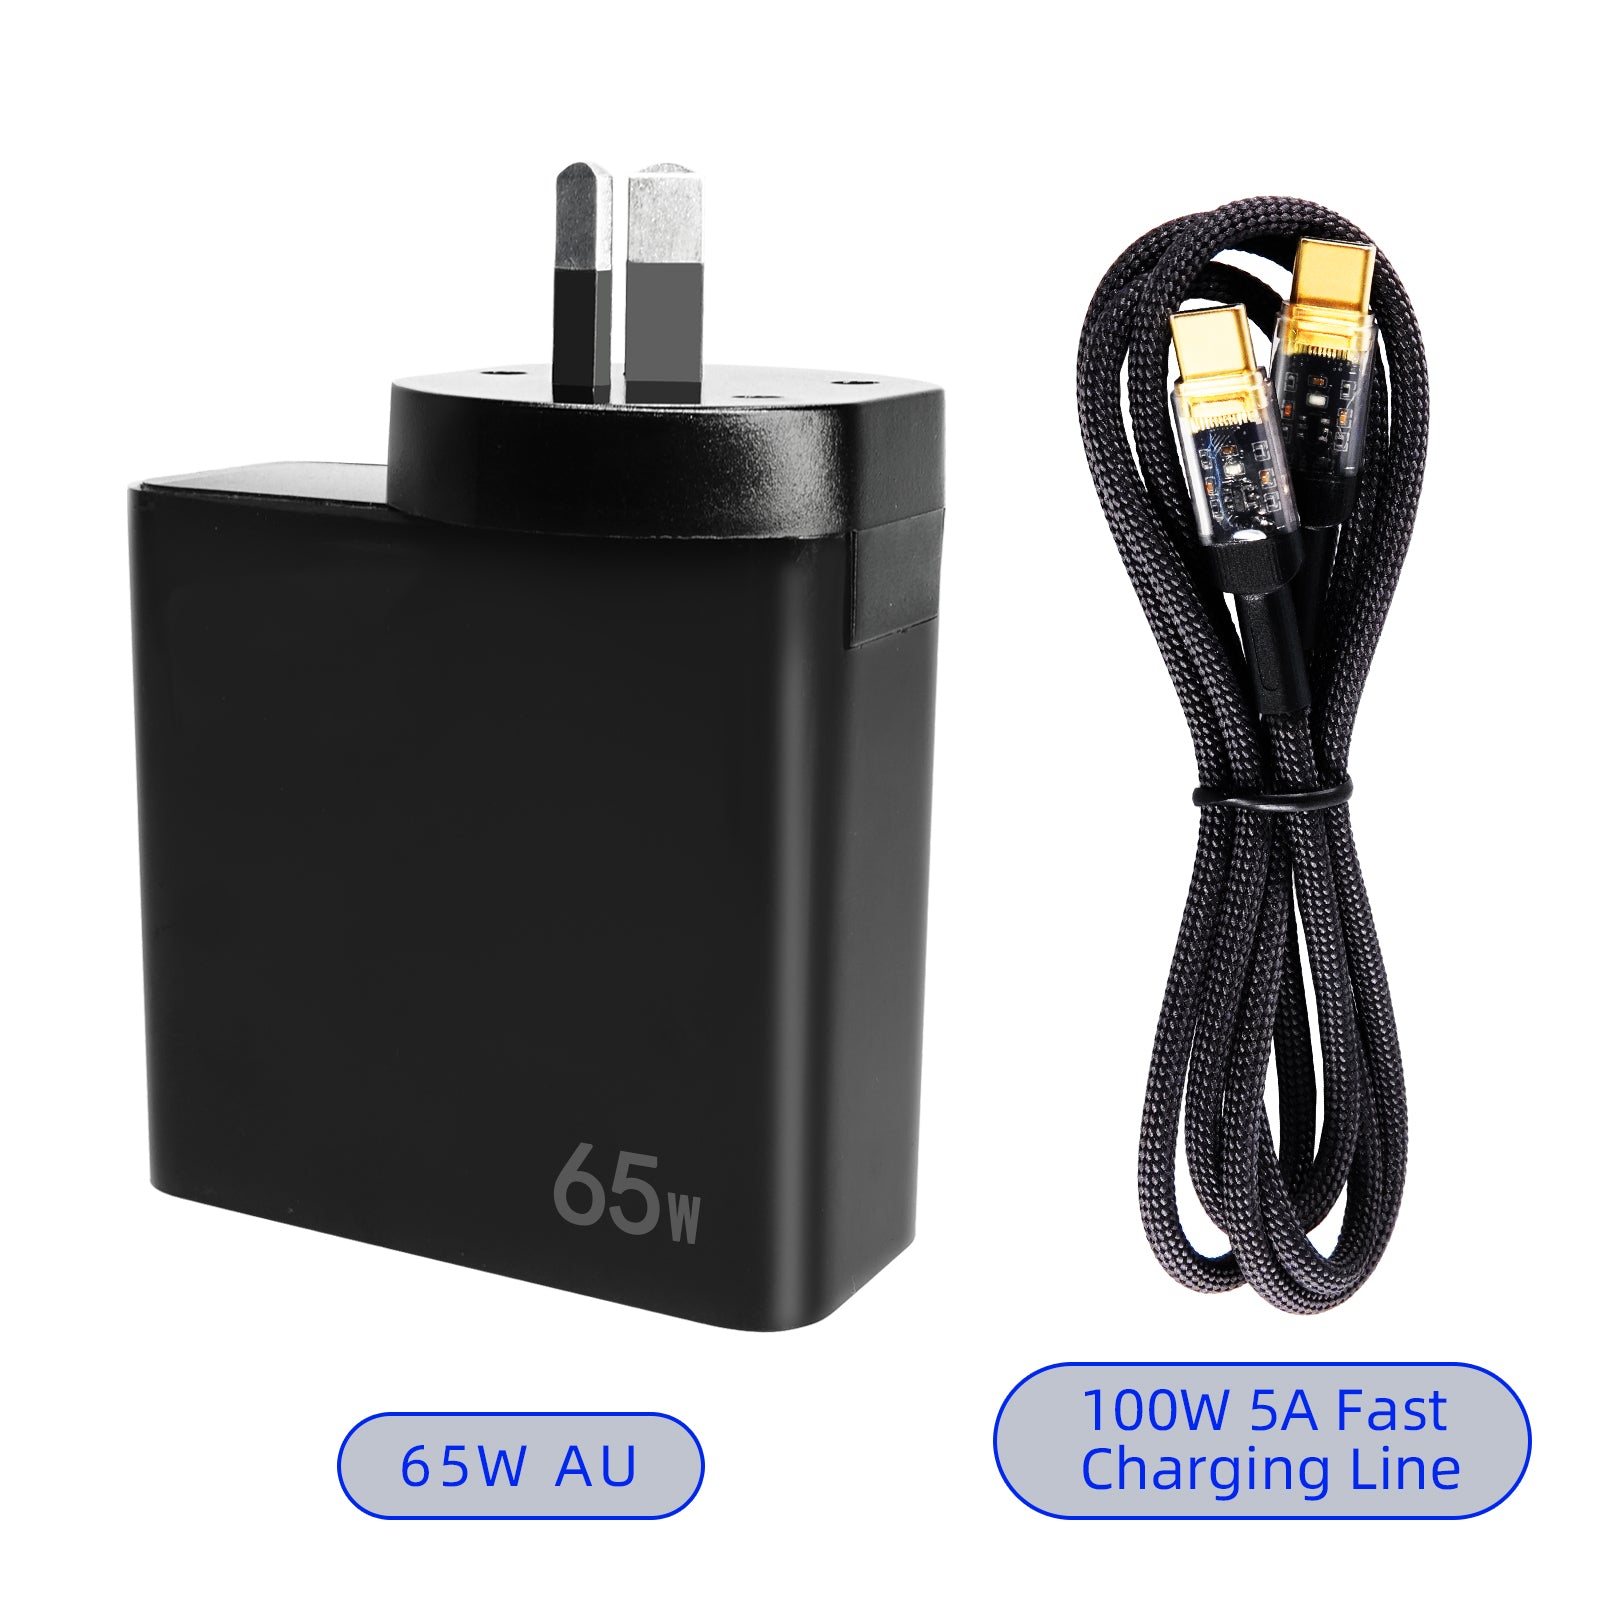 Dual port folding fast charging source PD65W US/EU/UK/AU with transparent indicator light PD100W 5A data cable